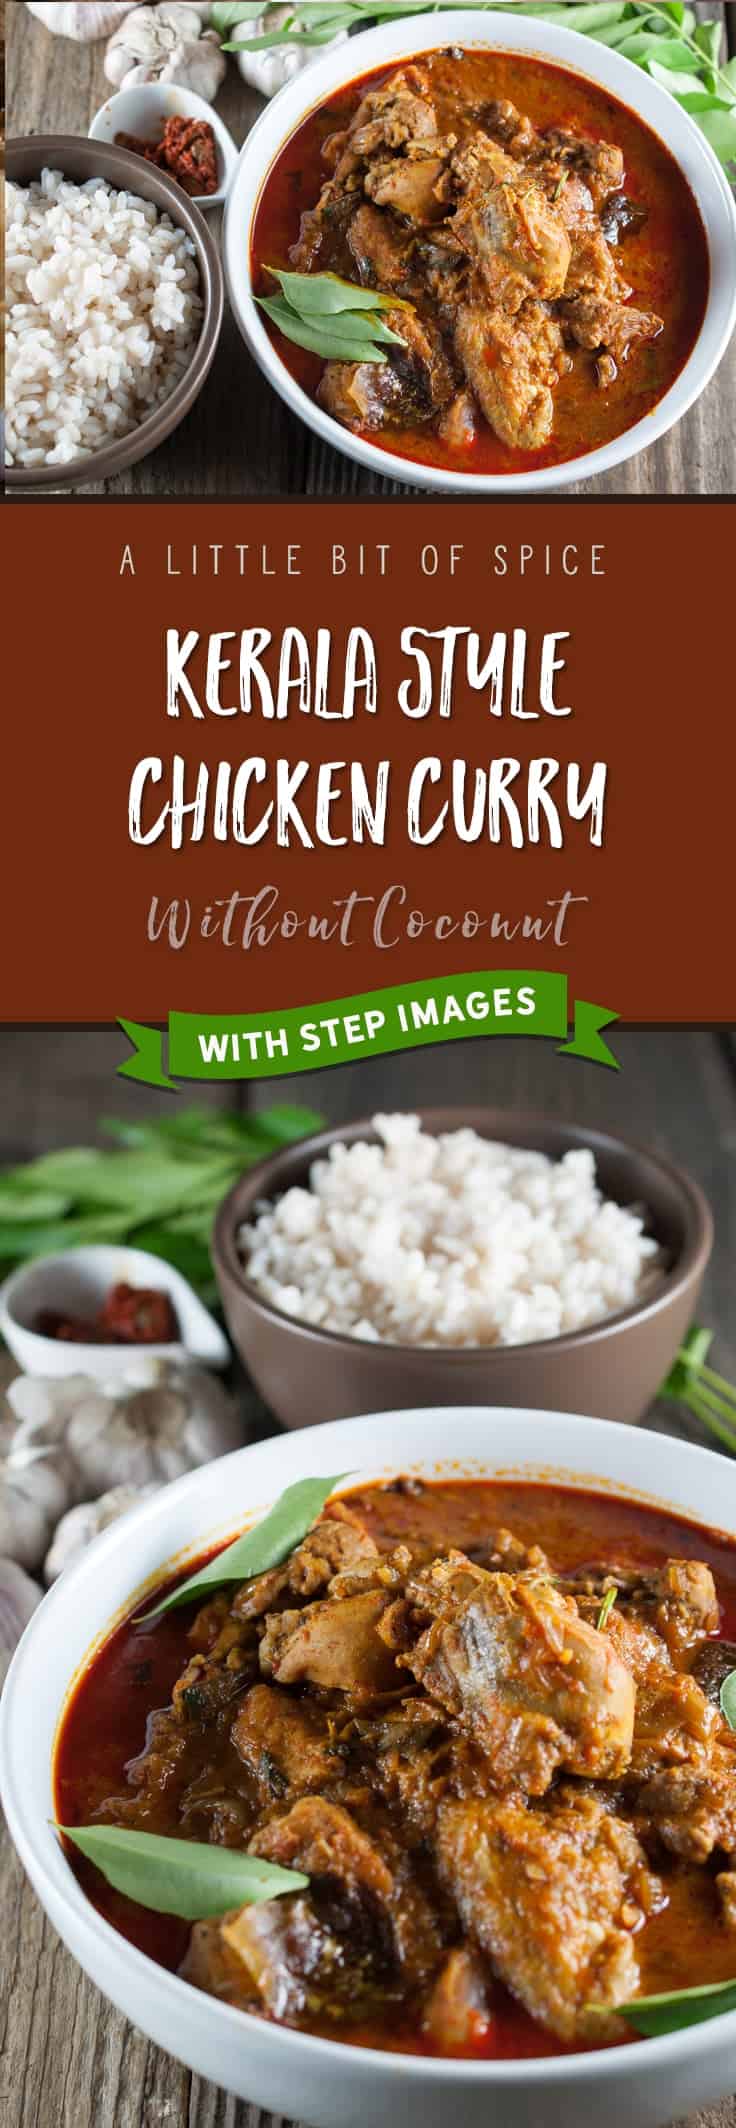 Kerala Style Chicken Curry - without coconut (Nadan kozhi curry) Recipe ...